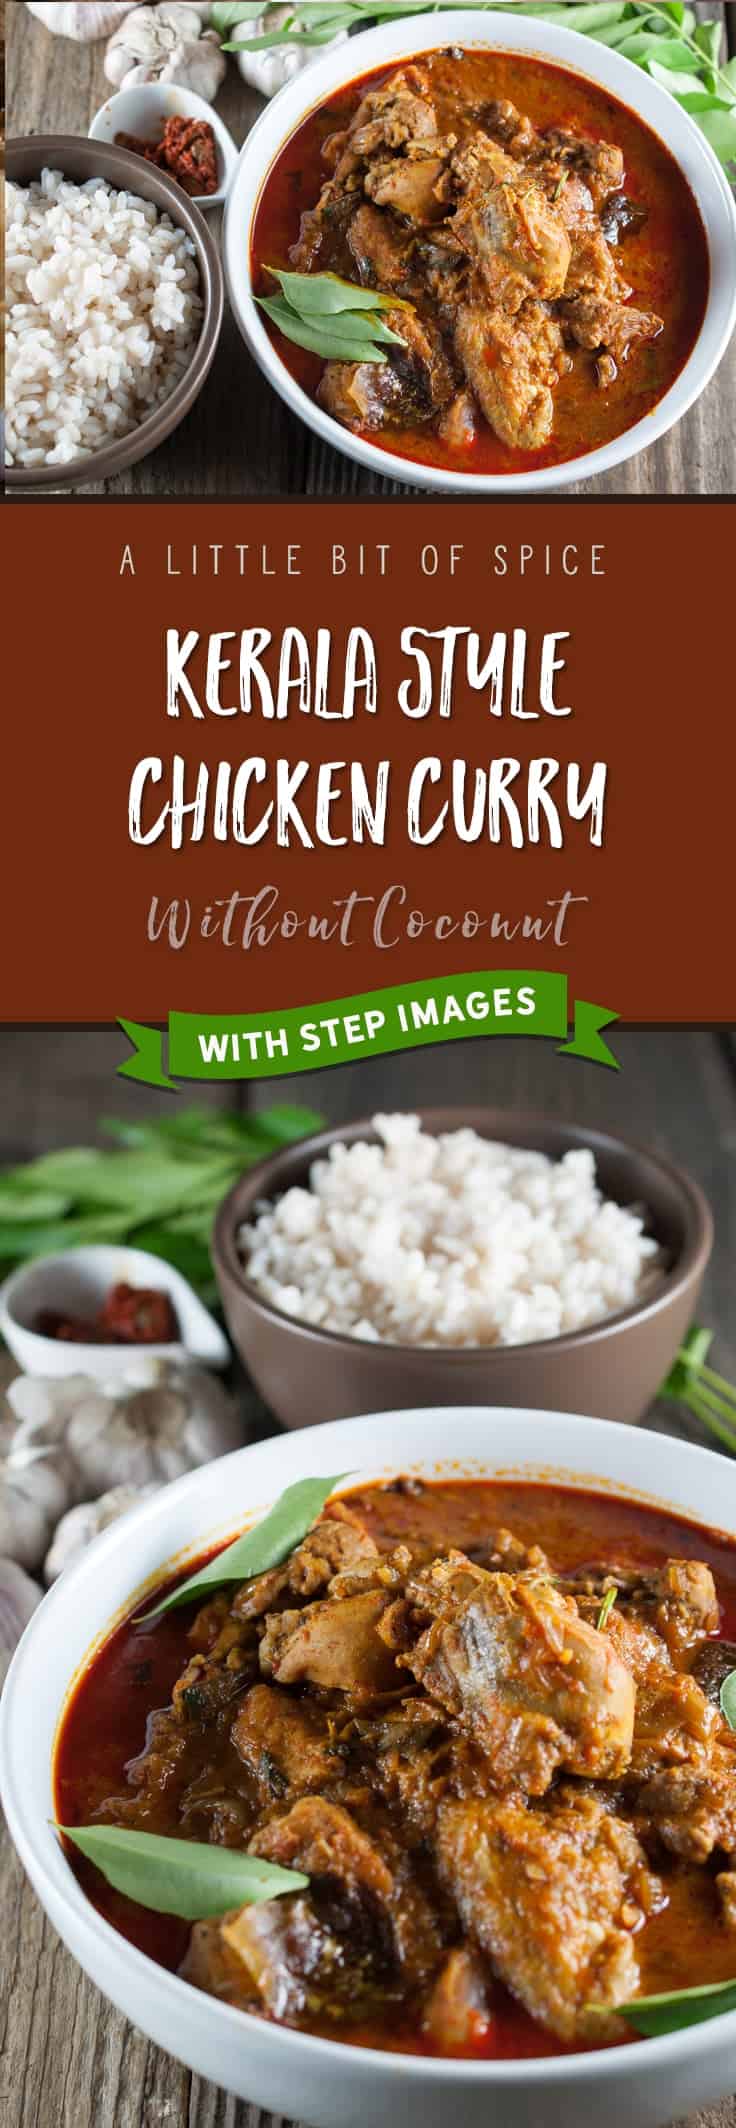 Kerala Style Chicken Curry - without coconut (Nadan kozhi curry) Recipe ...